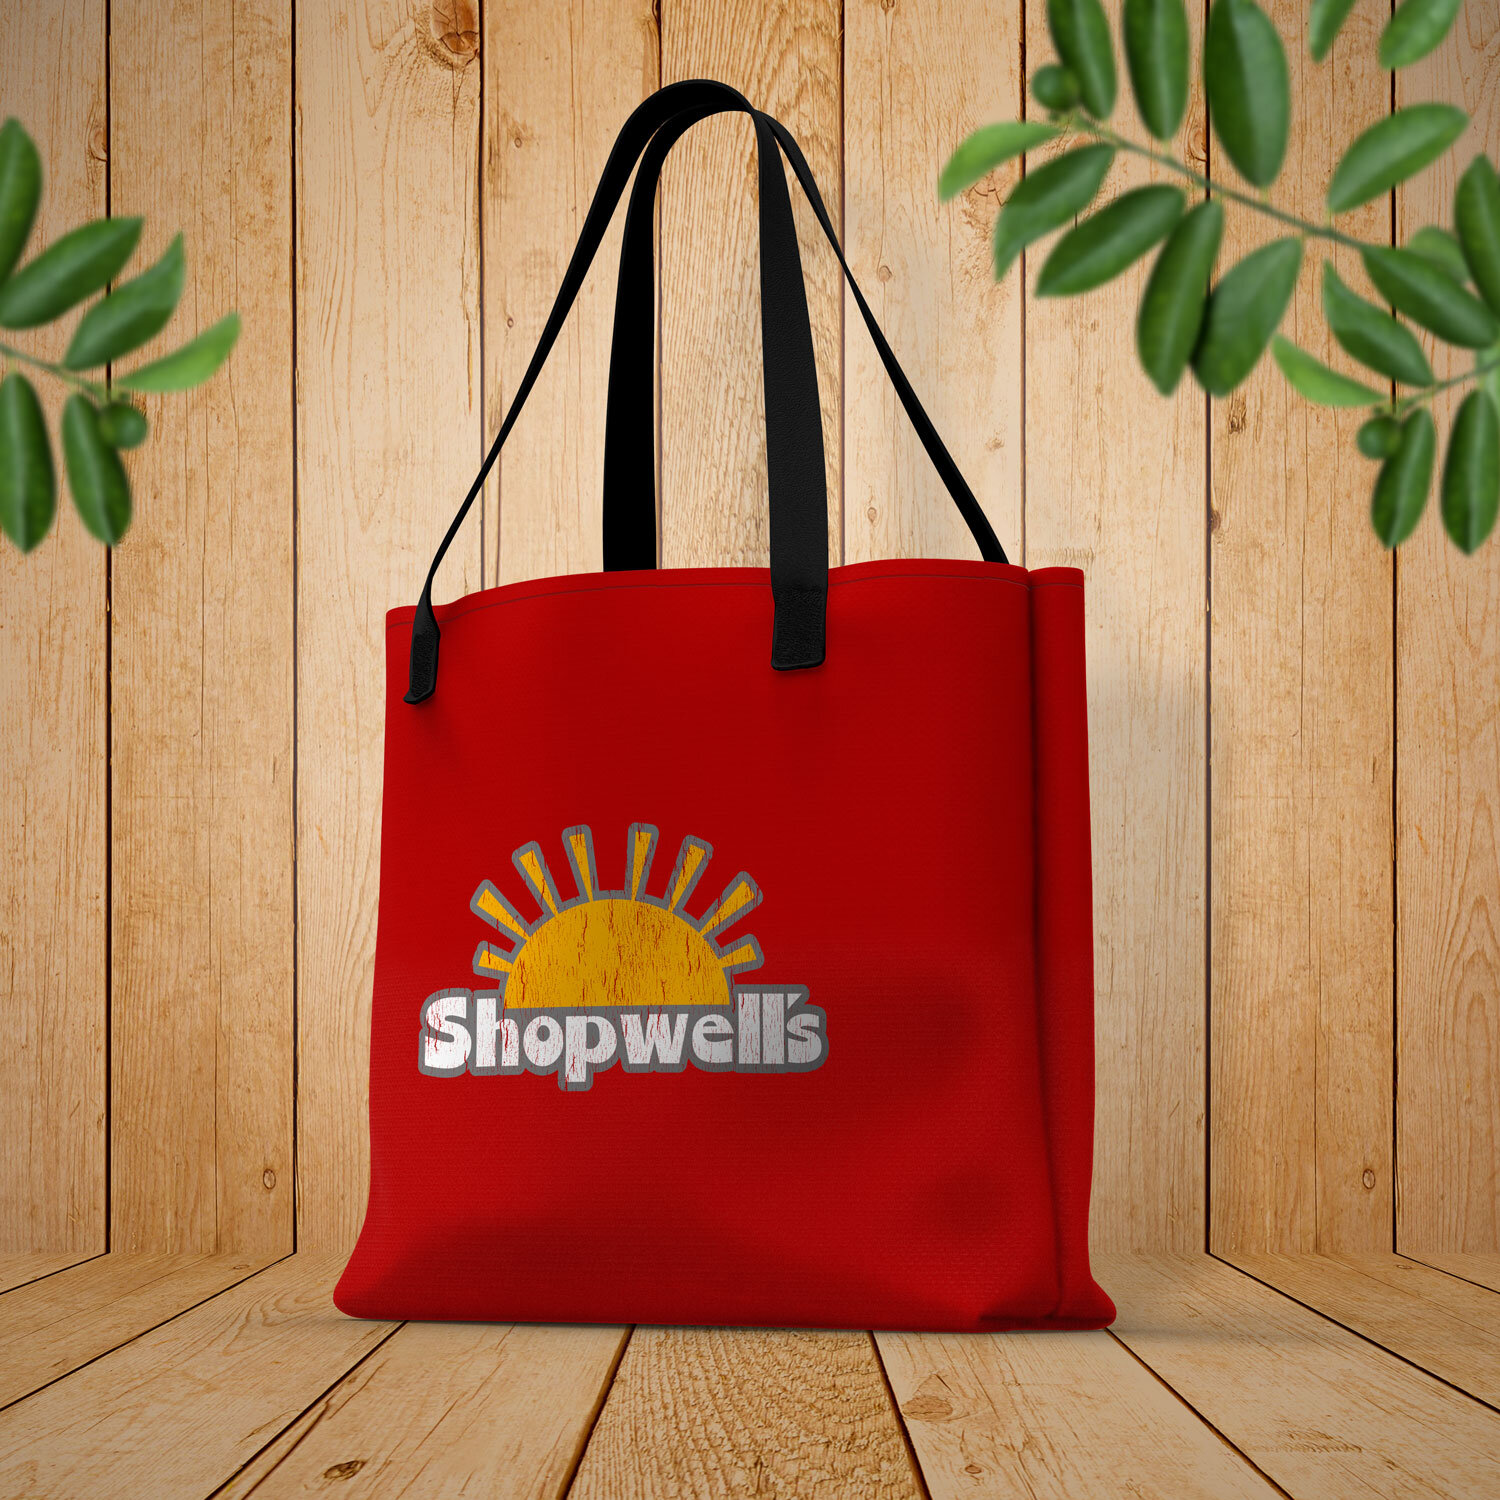 Shopwell's Tote Bag inspired by Sausage Party - Totes — MoviTees